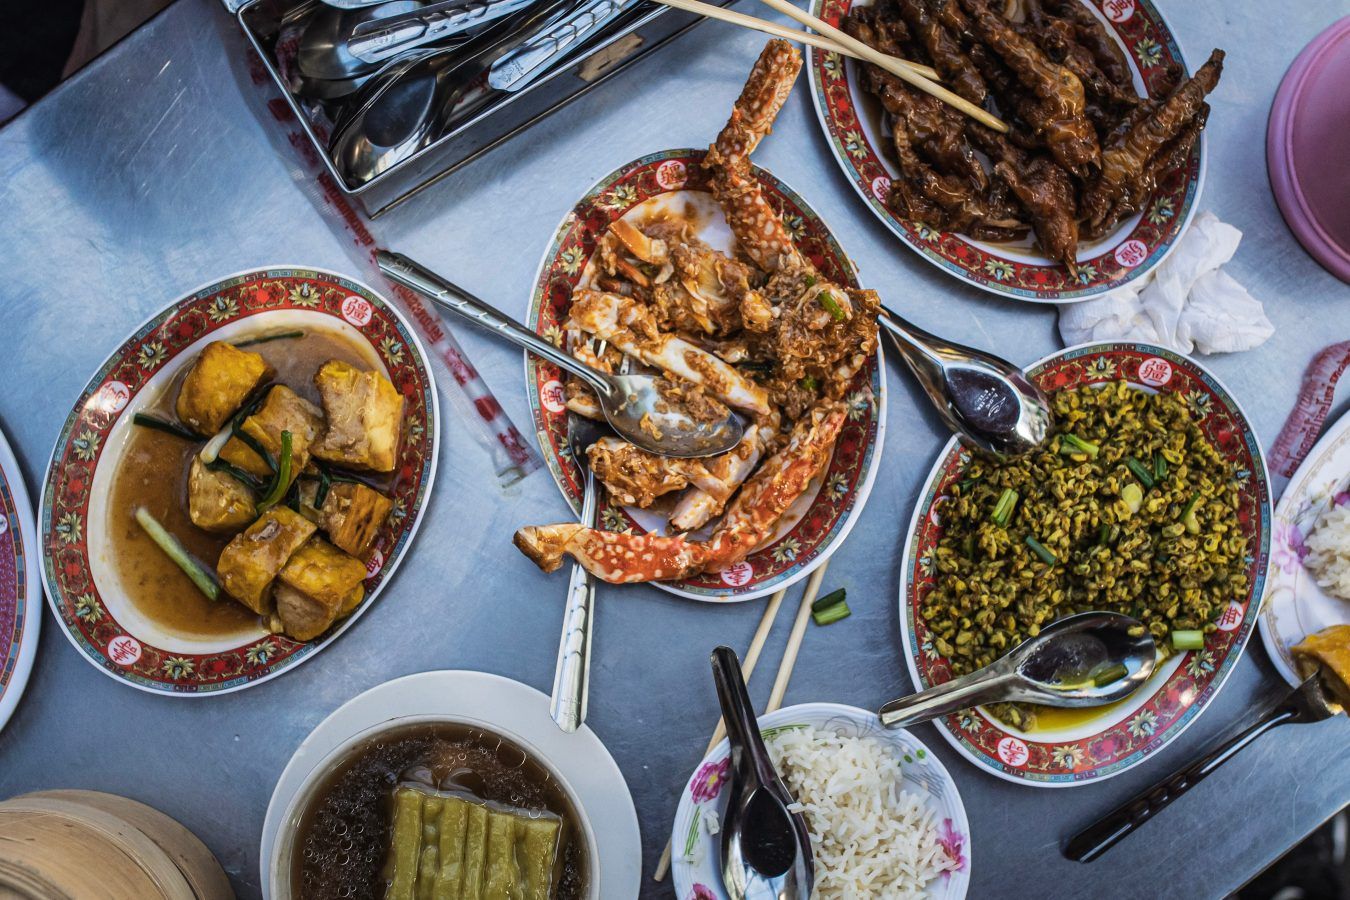 An itinerary for eating your way down Yaowarat Road